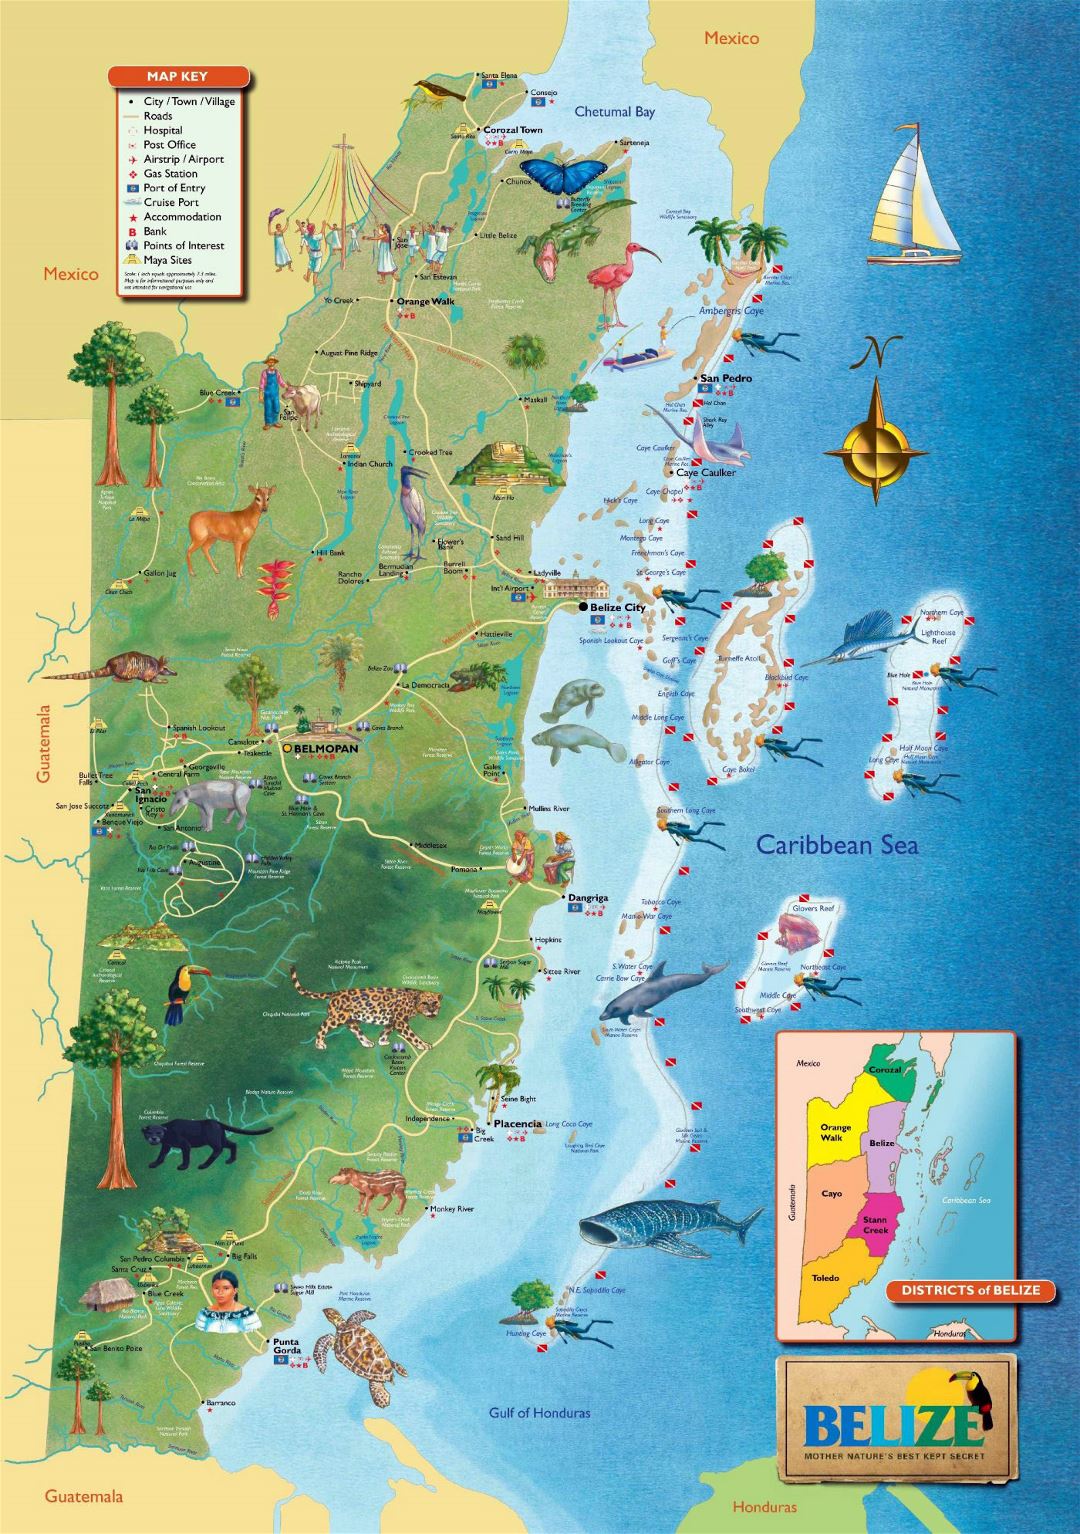 Large tourist map of Belize